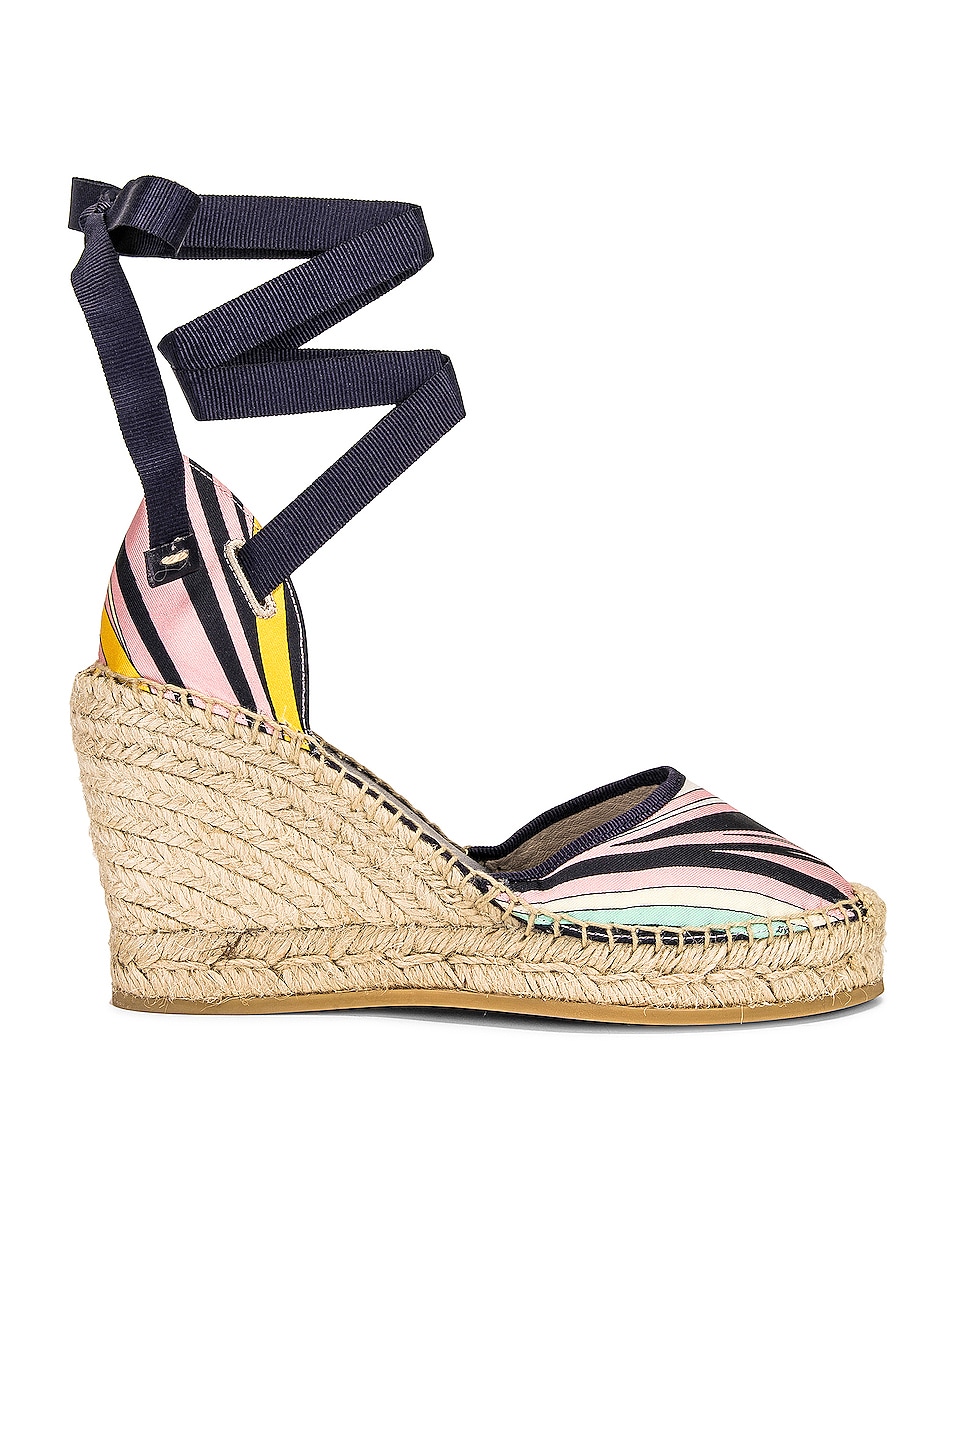 Image 1 of Emilio Pucci Onde Wedges in Navy & Rosa